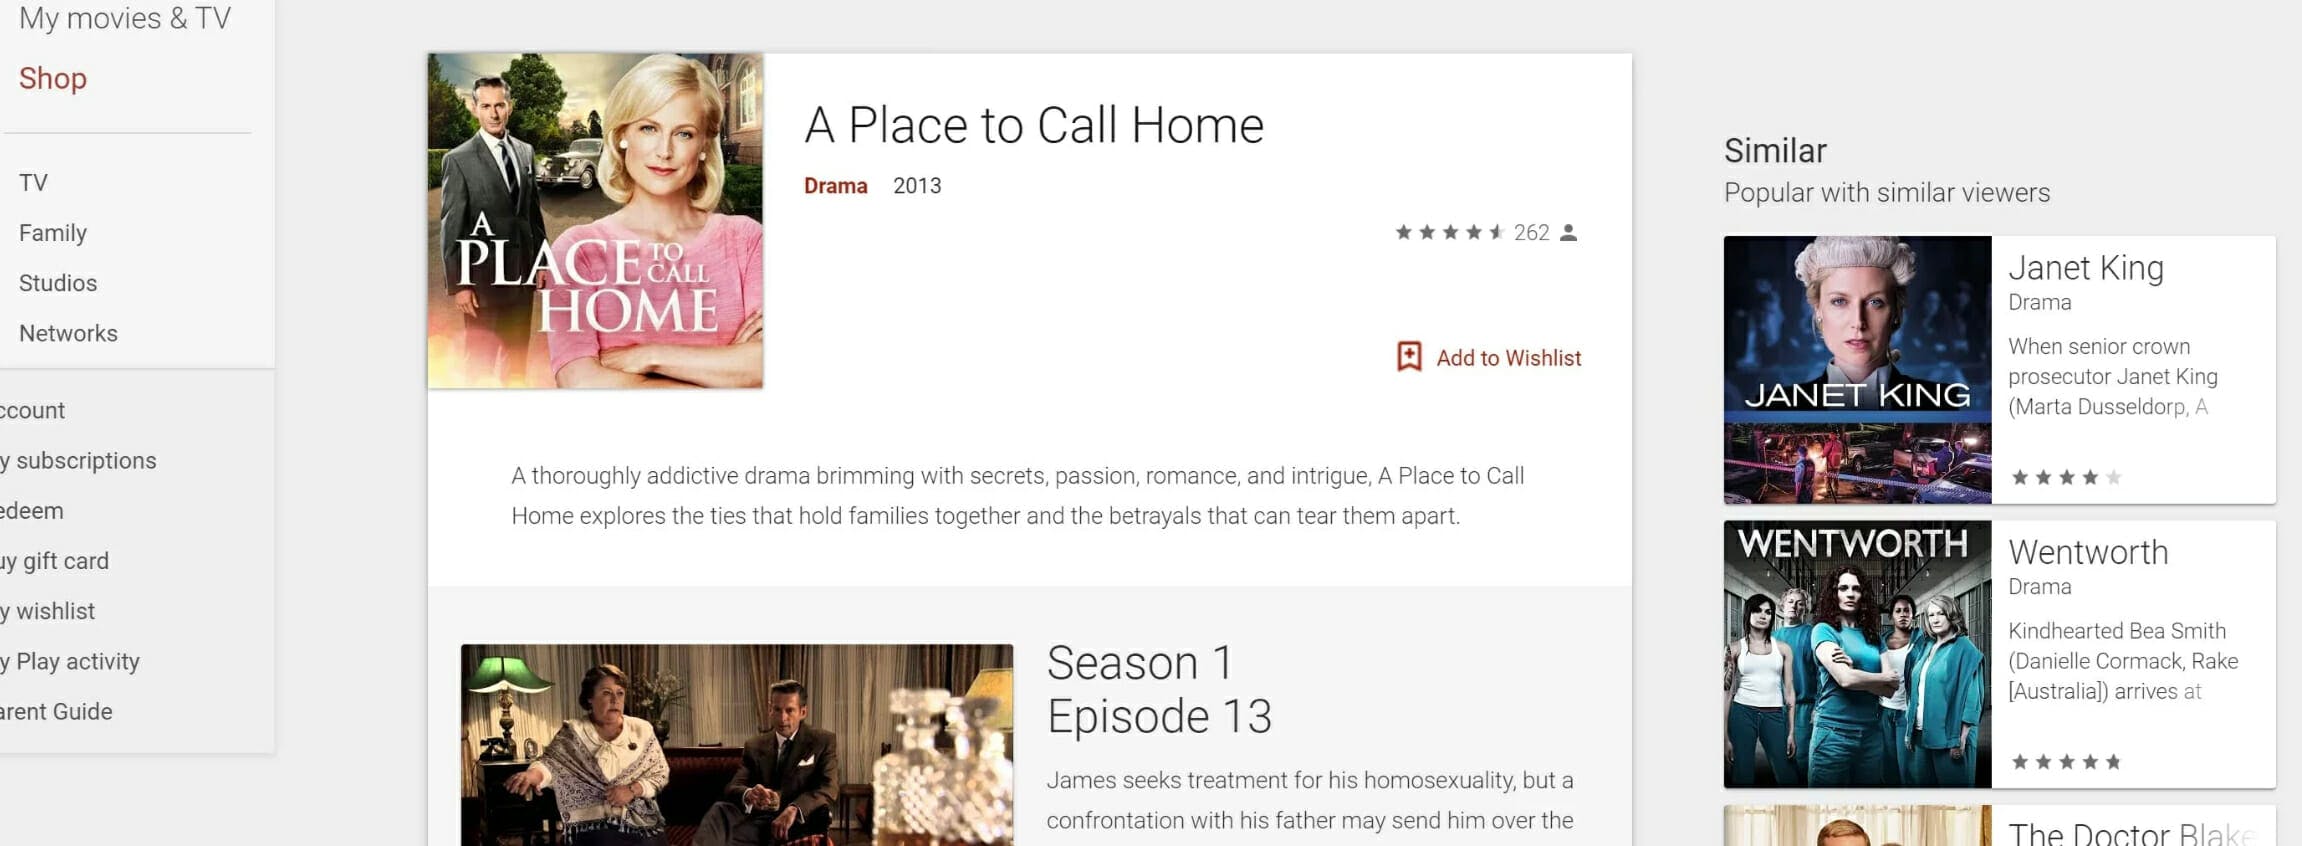 how to watch a place to call home online google play